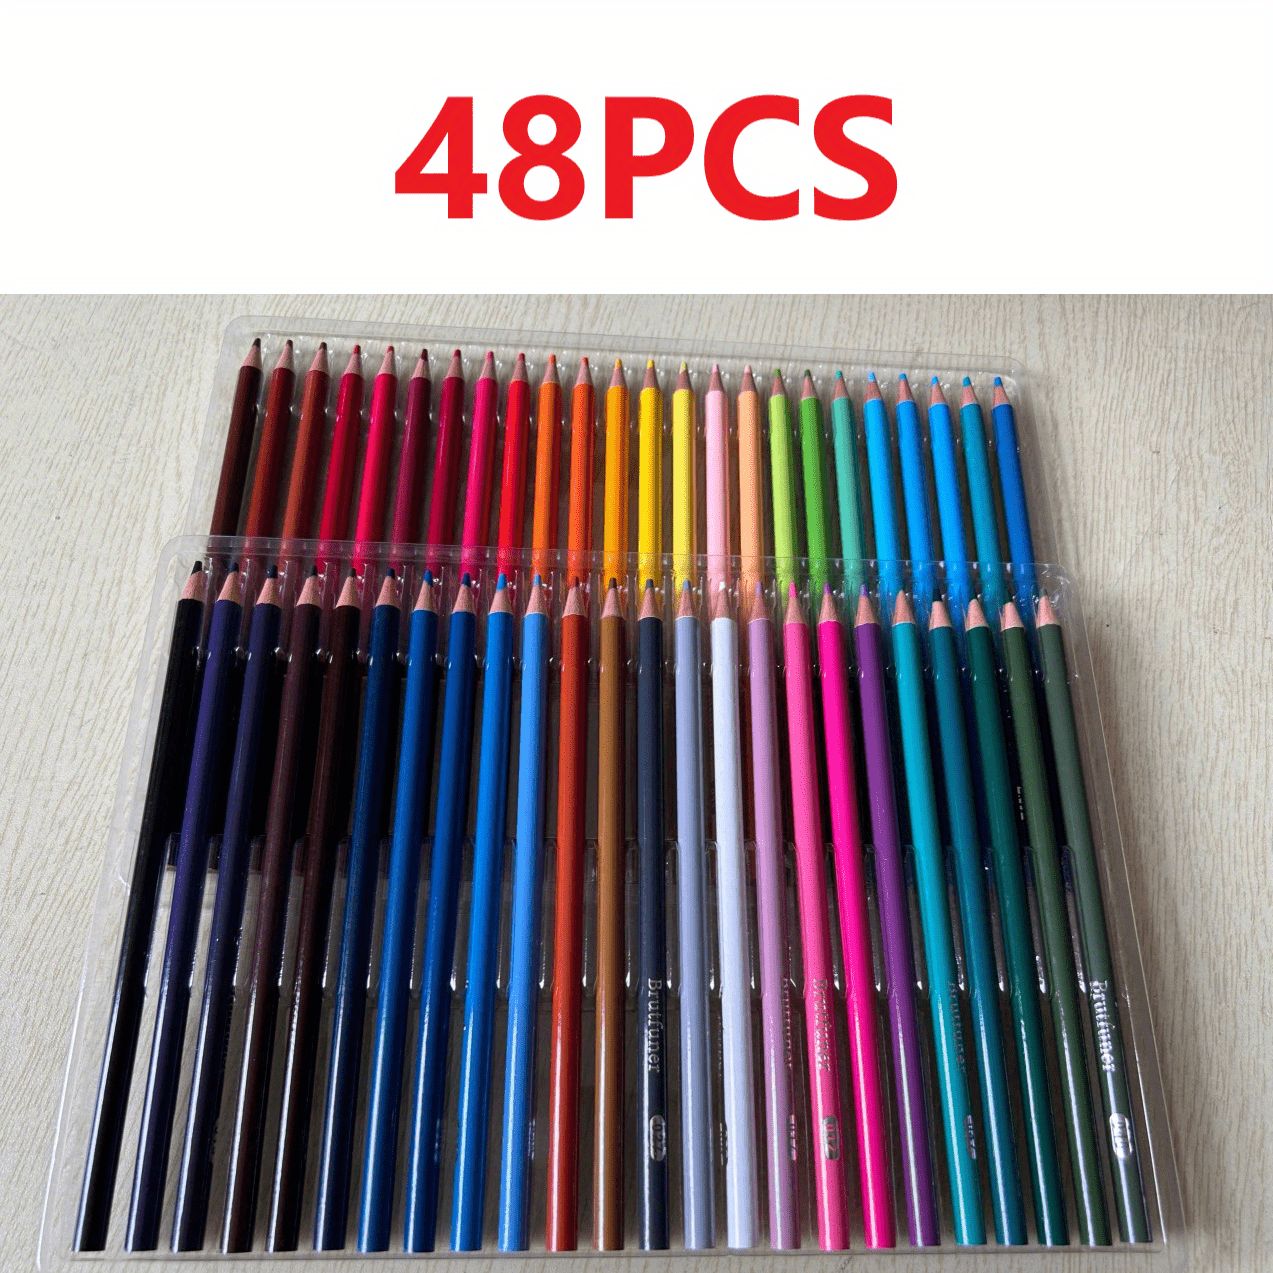 50 Color Metallic Colored Pencils Profession Drawing Soft Wood Pencil For  Artist Sketch Coloring Art Supplies